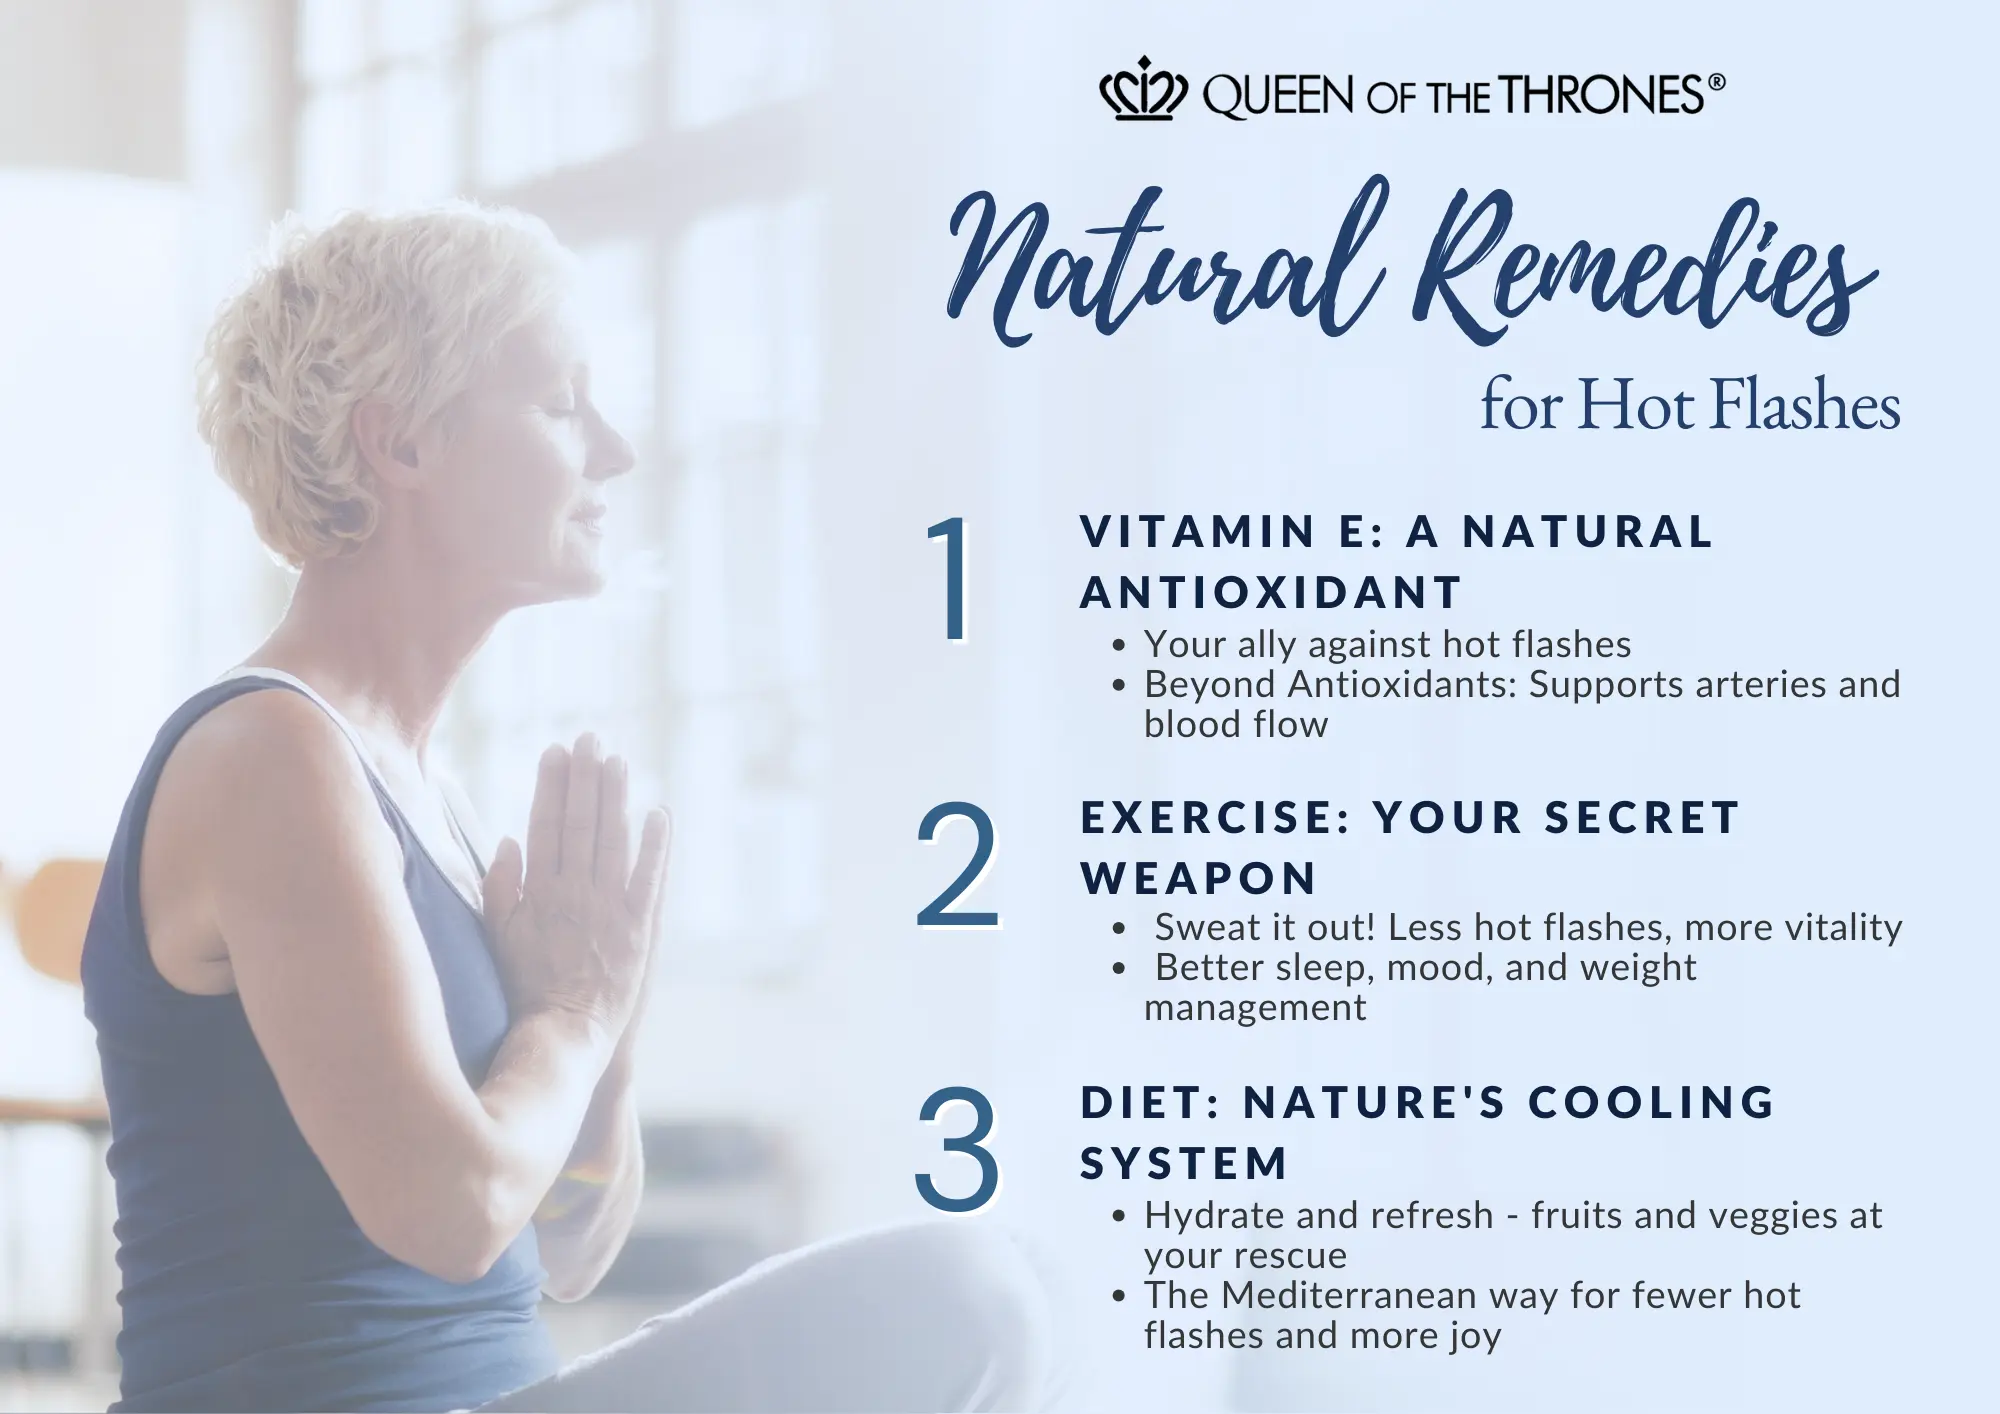 Natural remedies for hot flashes by Queen of the Thrones